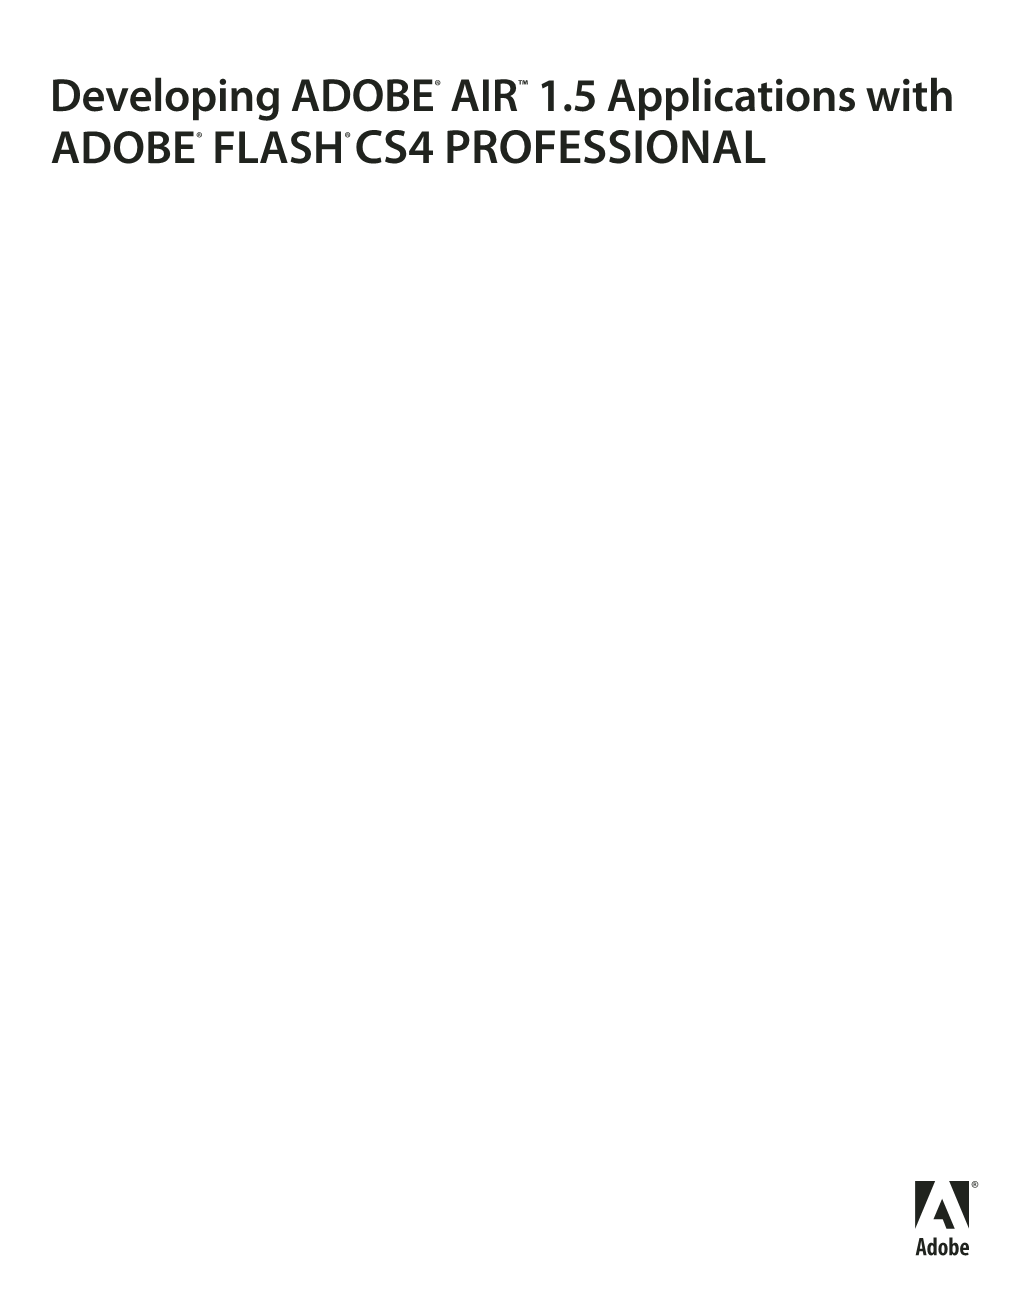 Developing Adobe® AIR® 1.5 Applications with Adobe® Flash